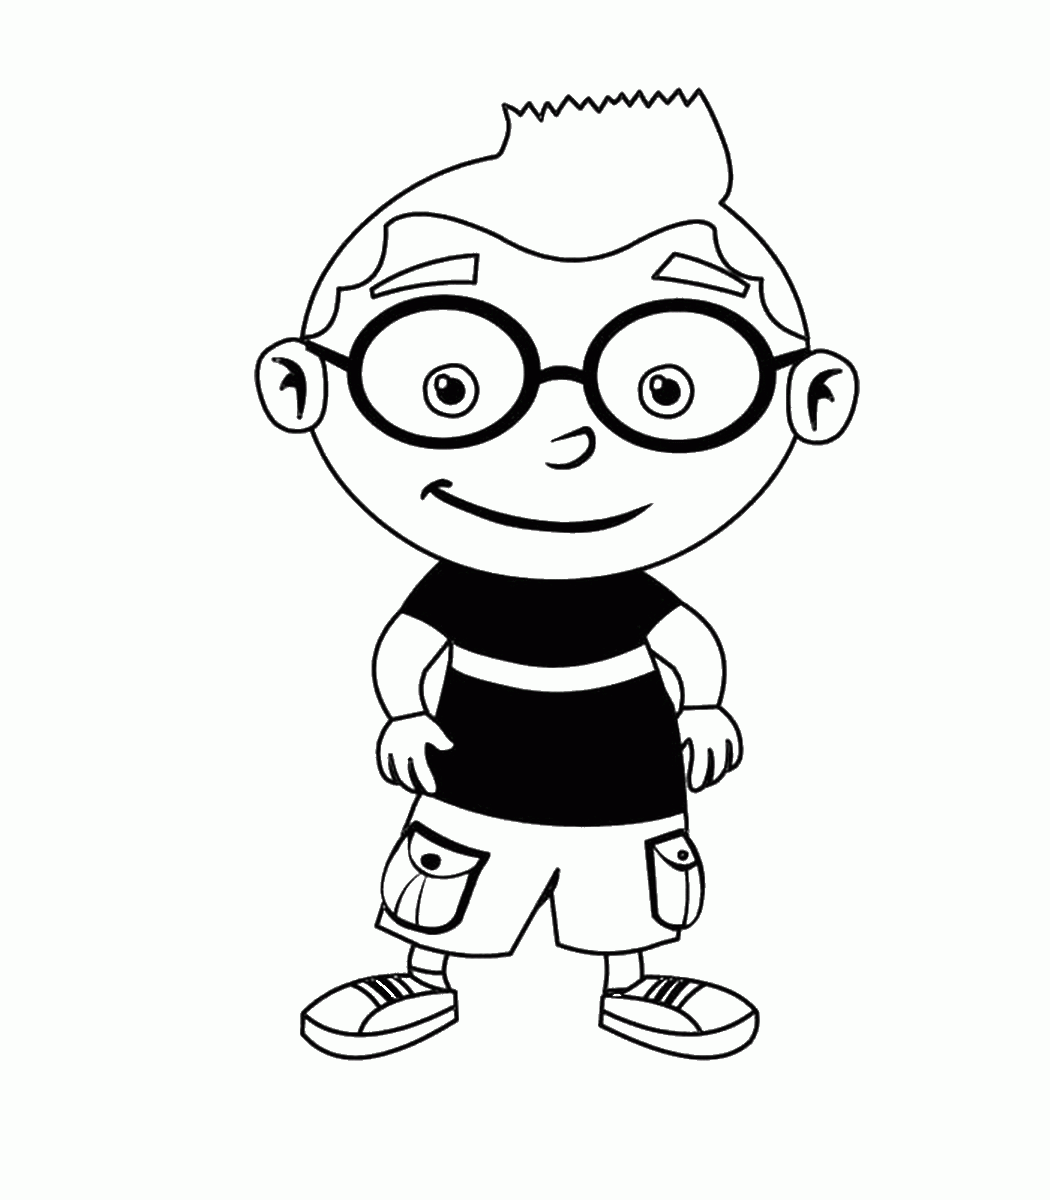 Little Einsteins Coloring Pages TV Film little_einsteins_32 Printable 2020 04496 Coloring4free